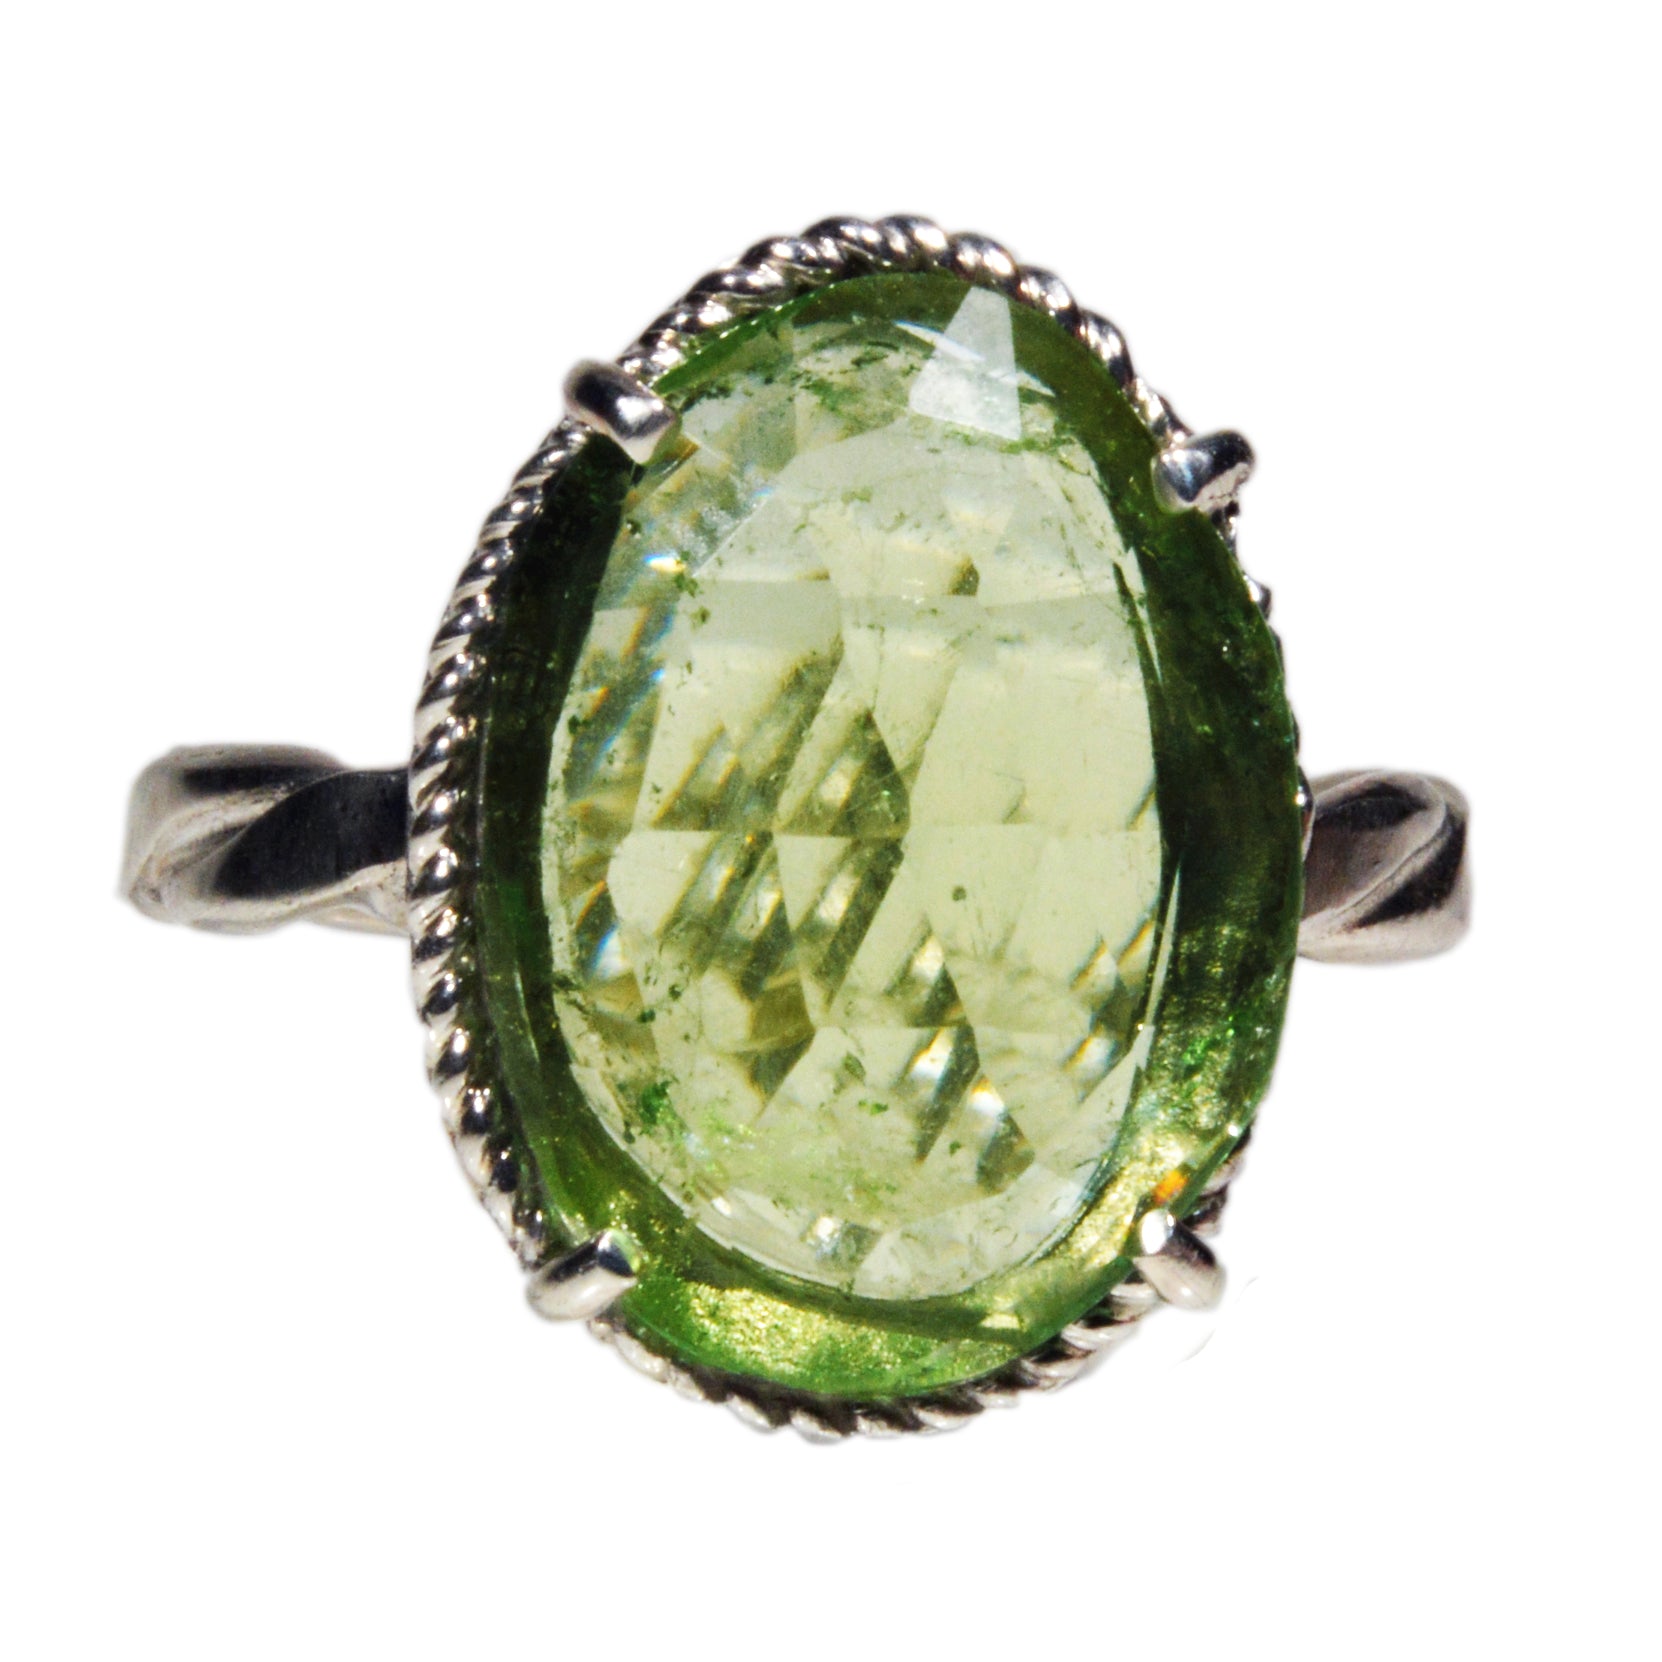 Green Tourmaline 5.72ct Rose Cut Sterling Silver Handcrafted Ring - EEO-047 - Crystalarium